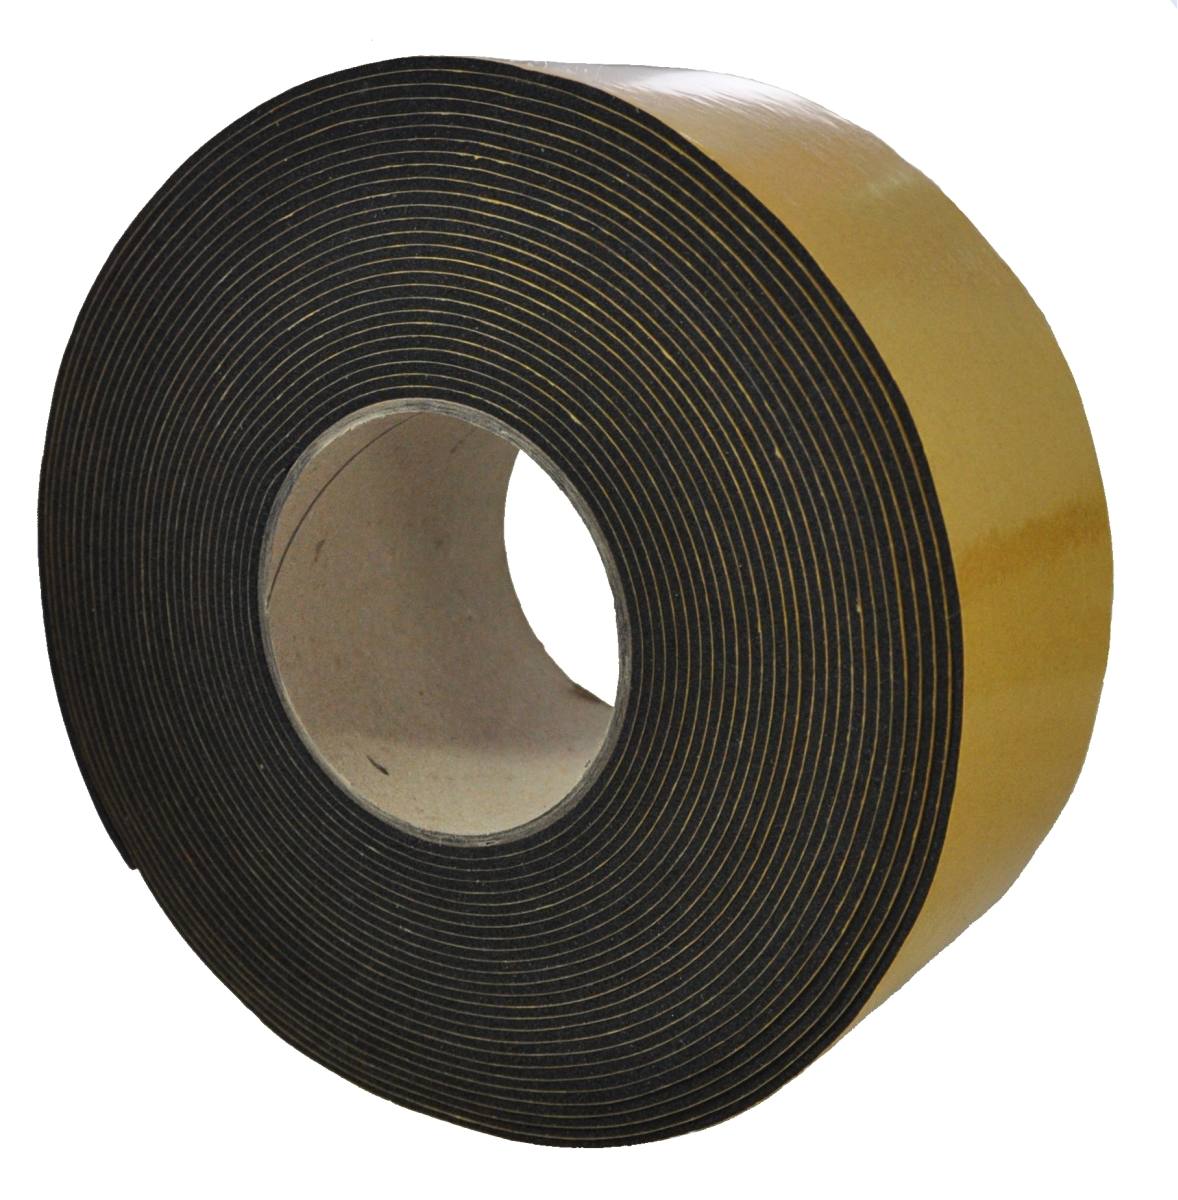 S-K-S EPDM 4mmx50mmx10m black self-adhesive on one side